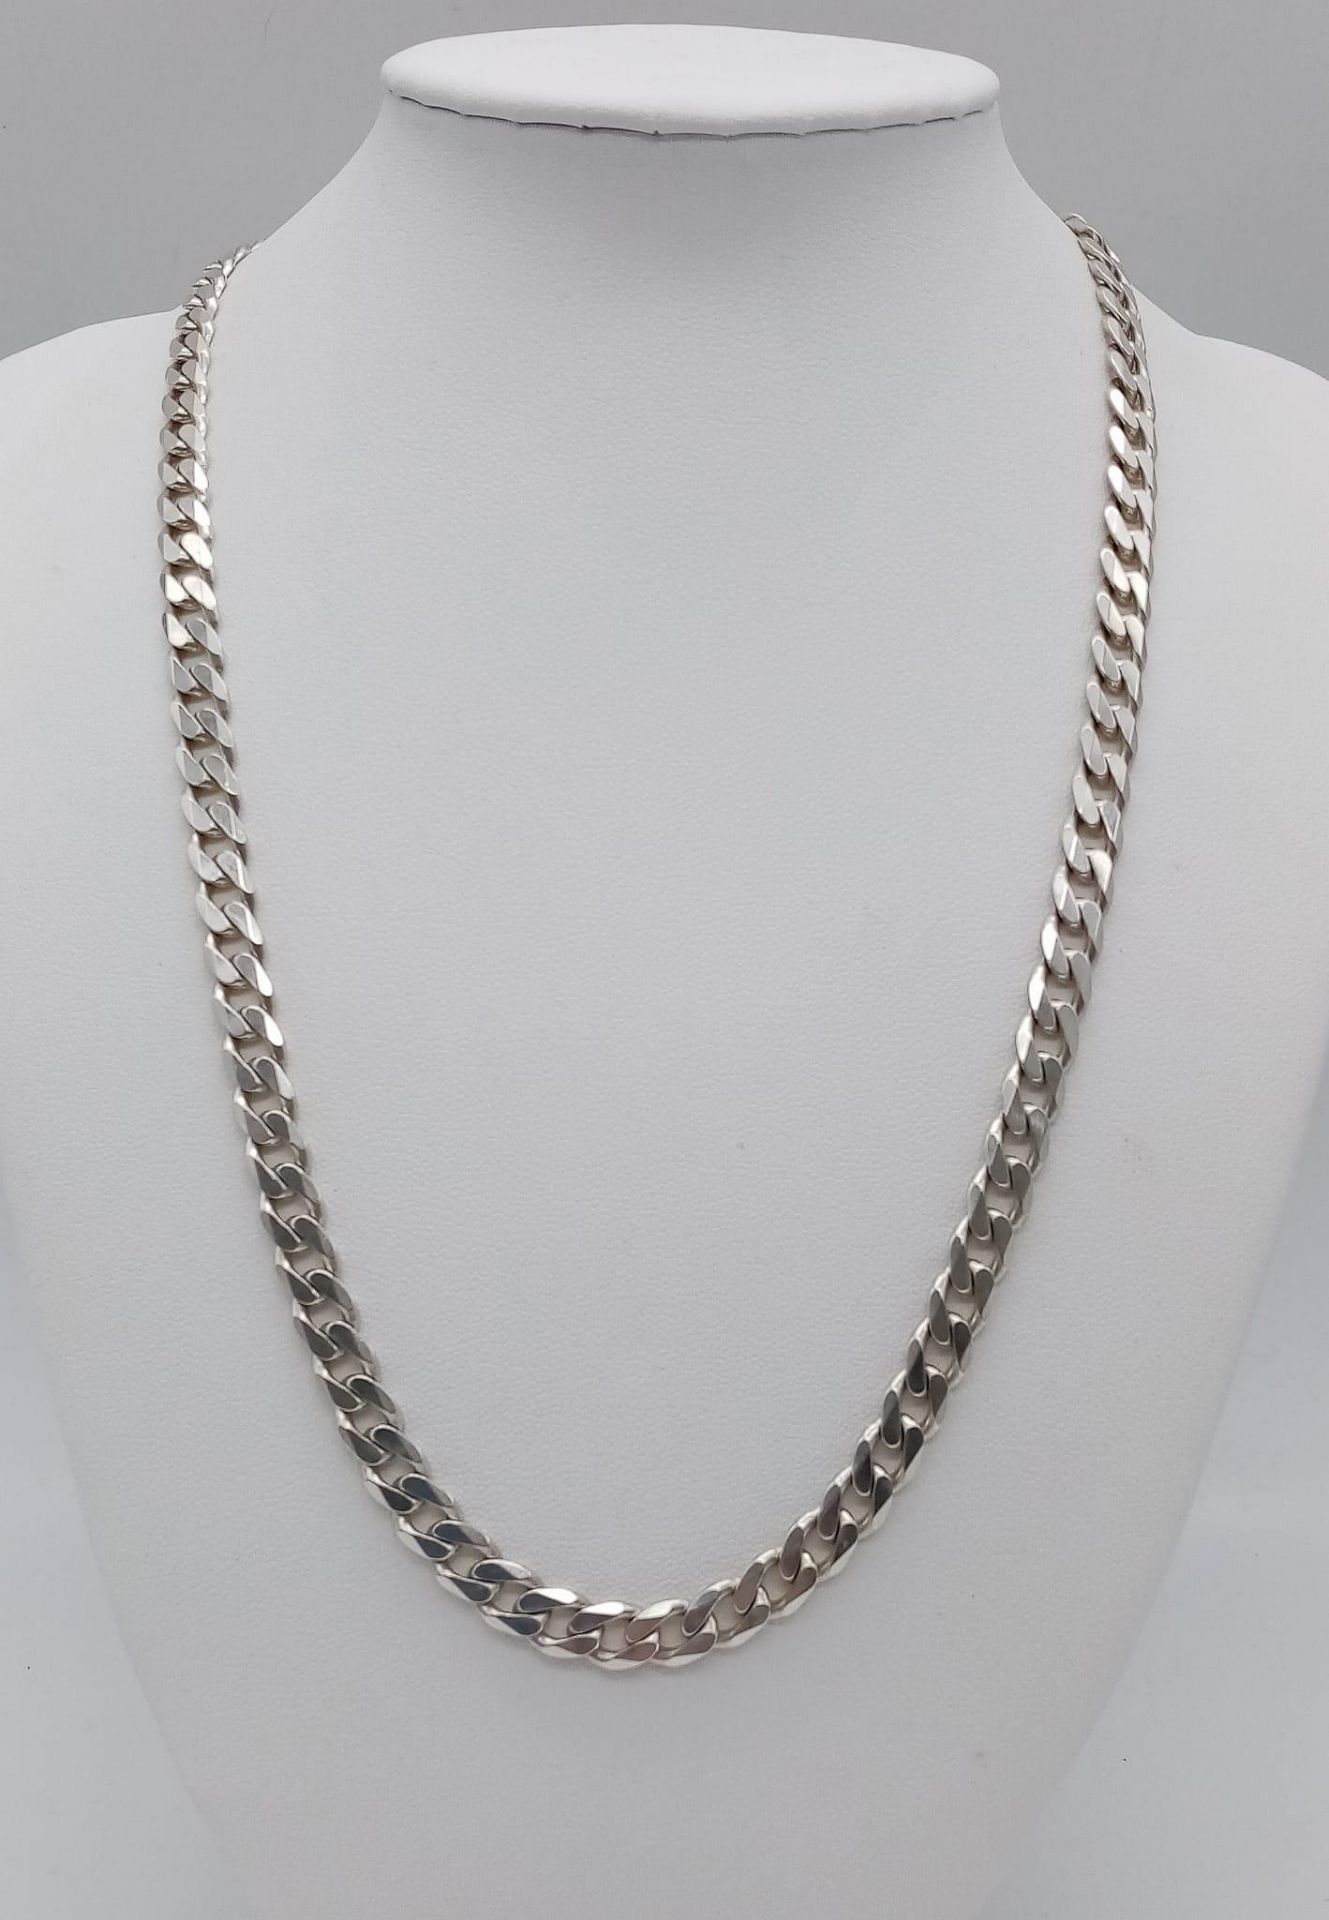 A STERLING SILVER CURB NECKLACE. TOTAL WEIGHT 32.8G. TOTAL LENGTH APPROX 53CM.